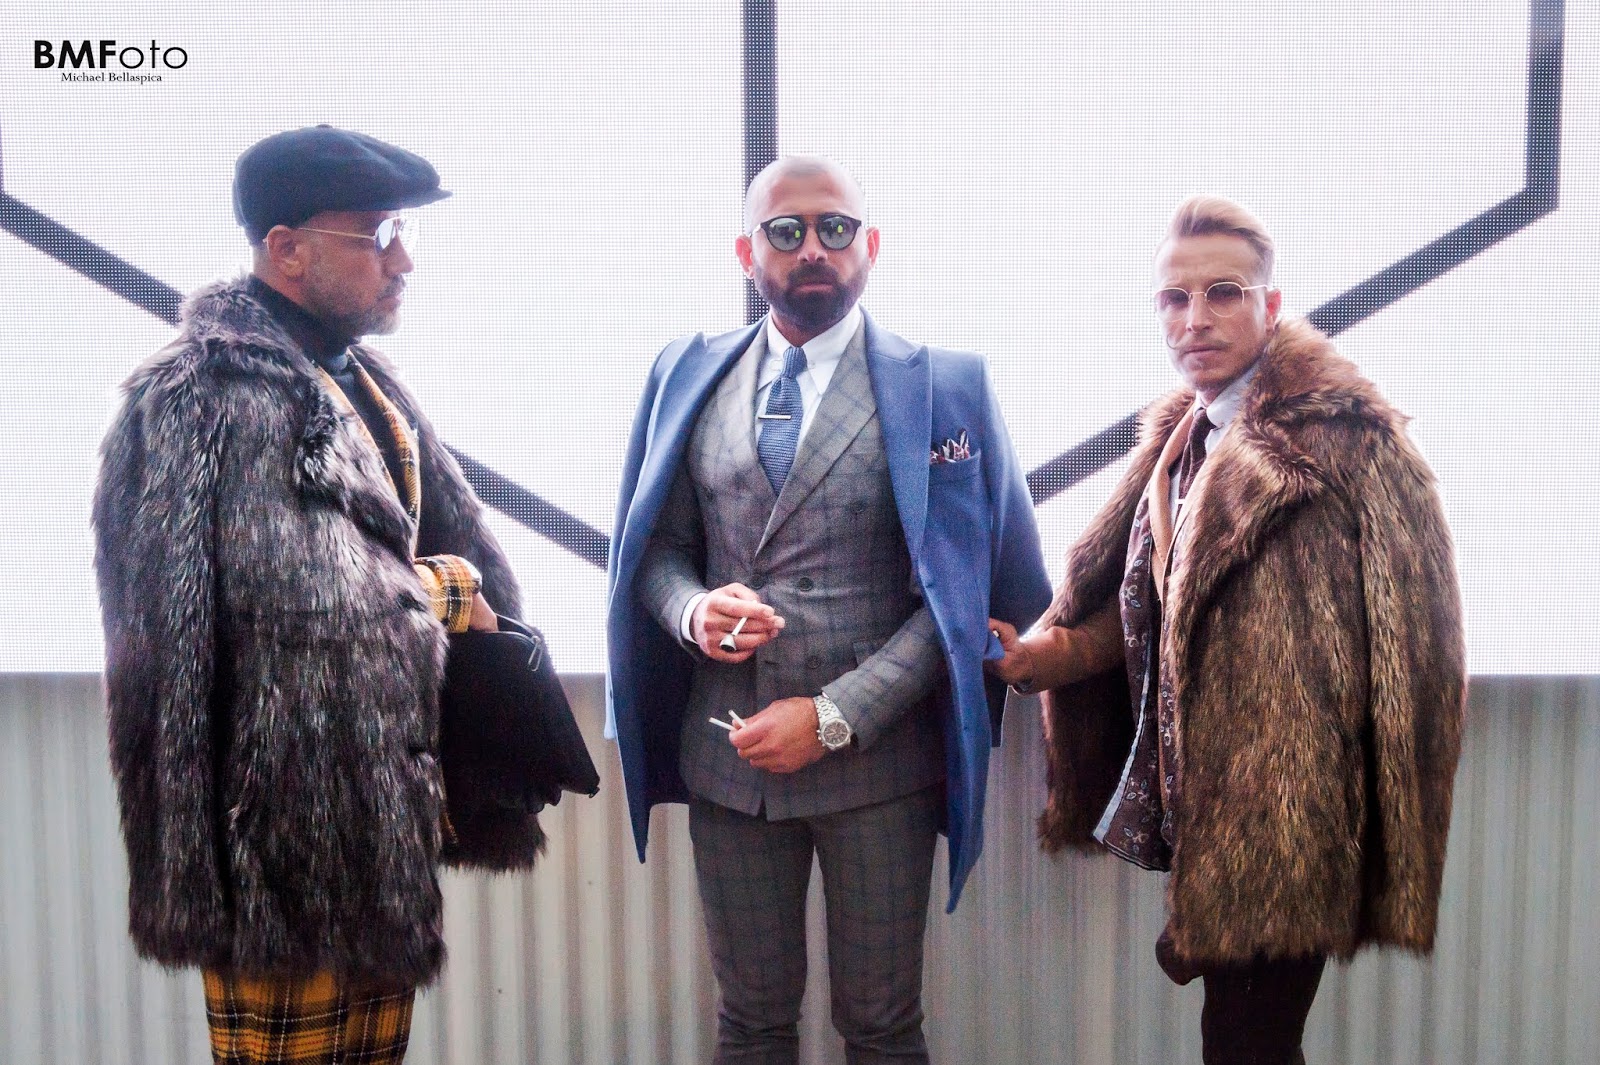 street style photos from Pitti Immagine Uomo 95 on Fashion and Cookies fashion blog